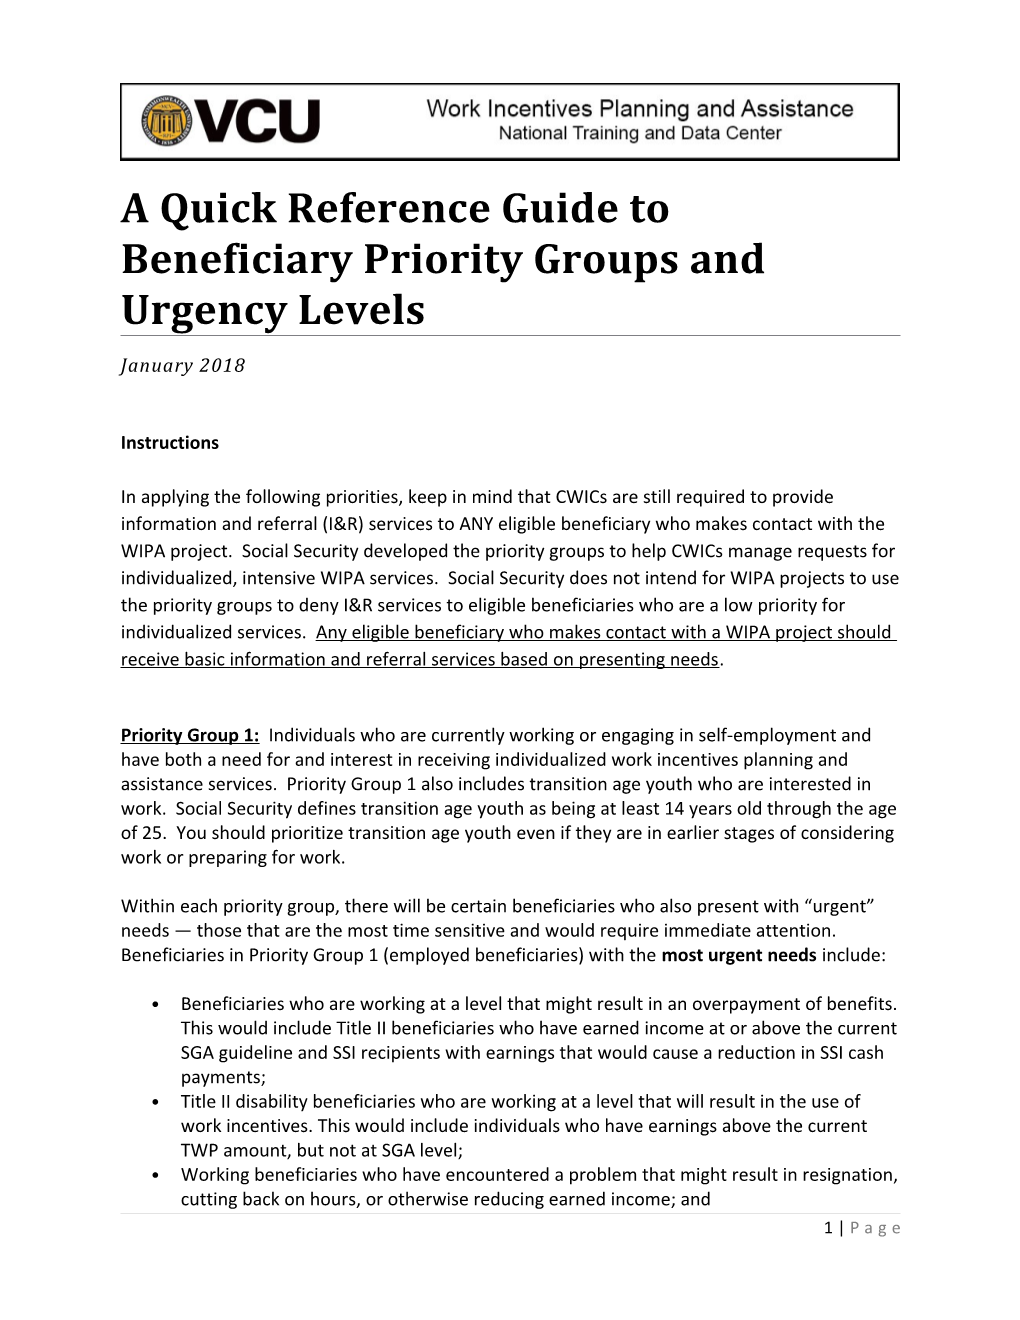 A Quick Reference Guide to Beneficiary Priority Groups and Urgency Levels